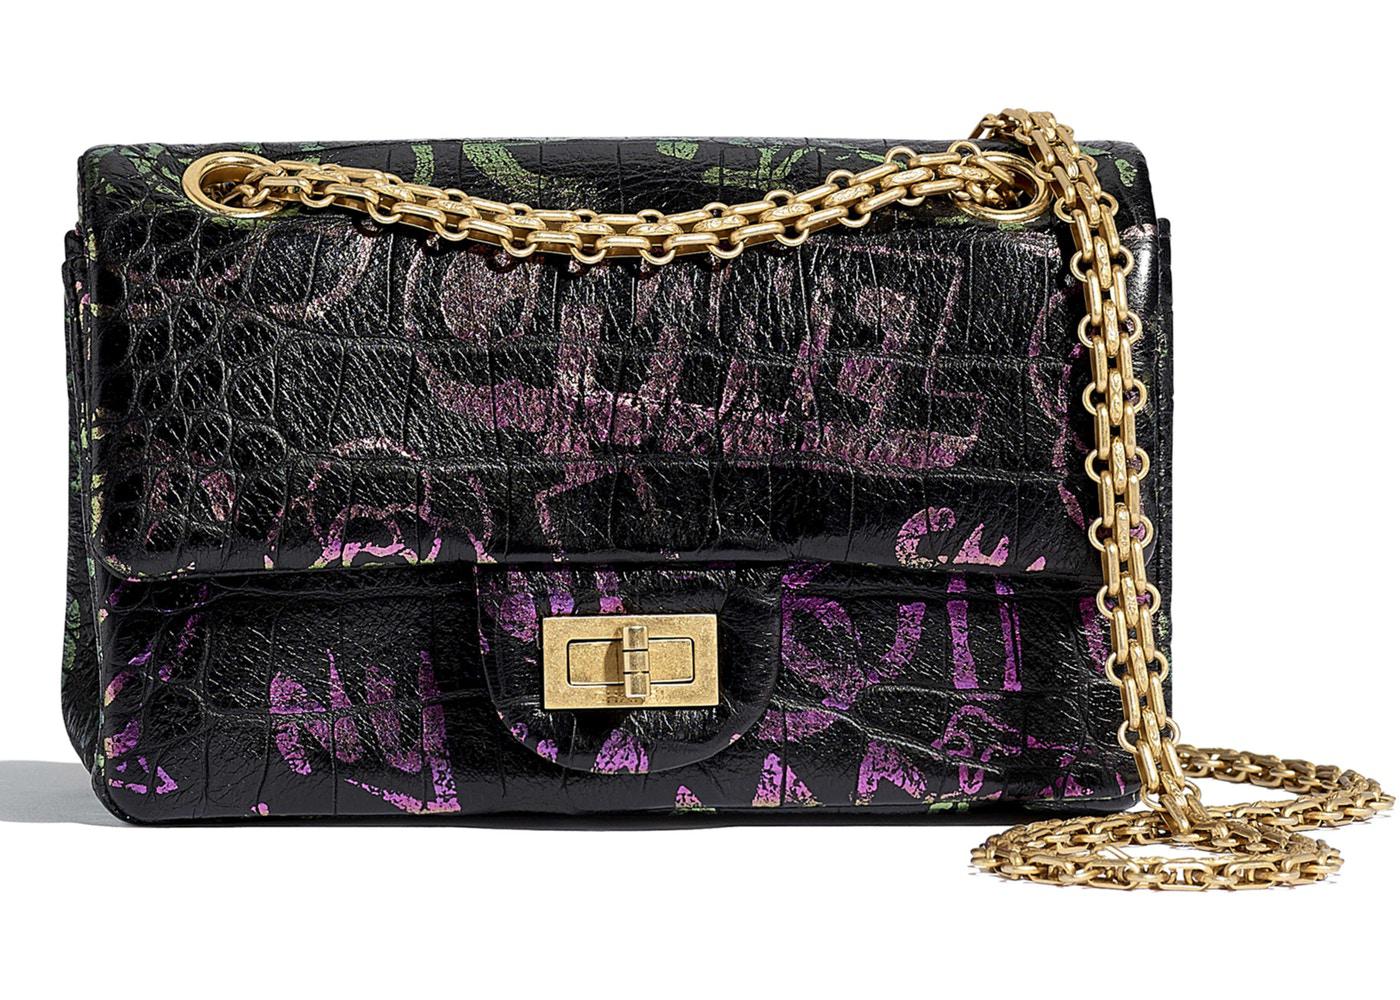 2.55 Handbag Crocodile Embossed Printed Leather Gold-tone Small Black/Pink by CHANEL